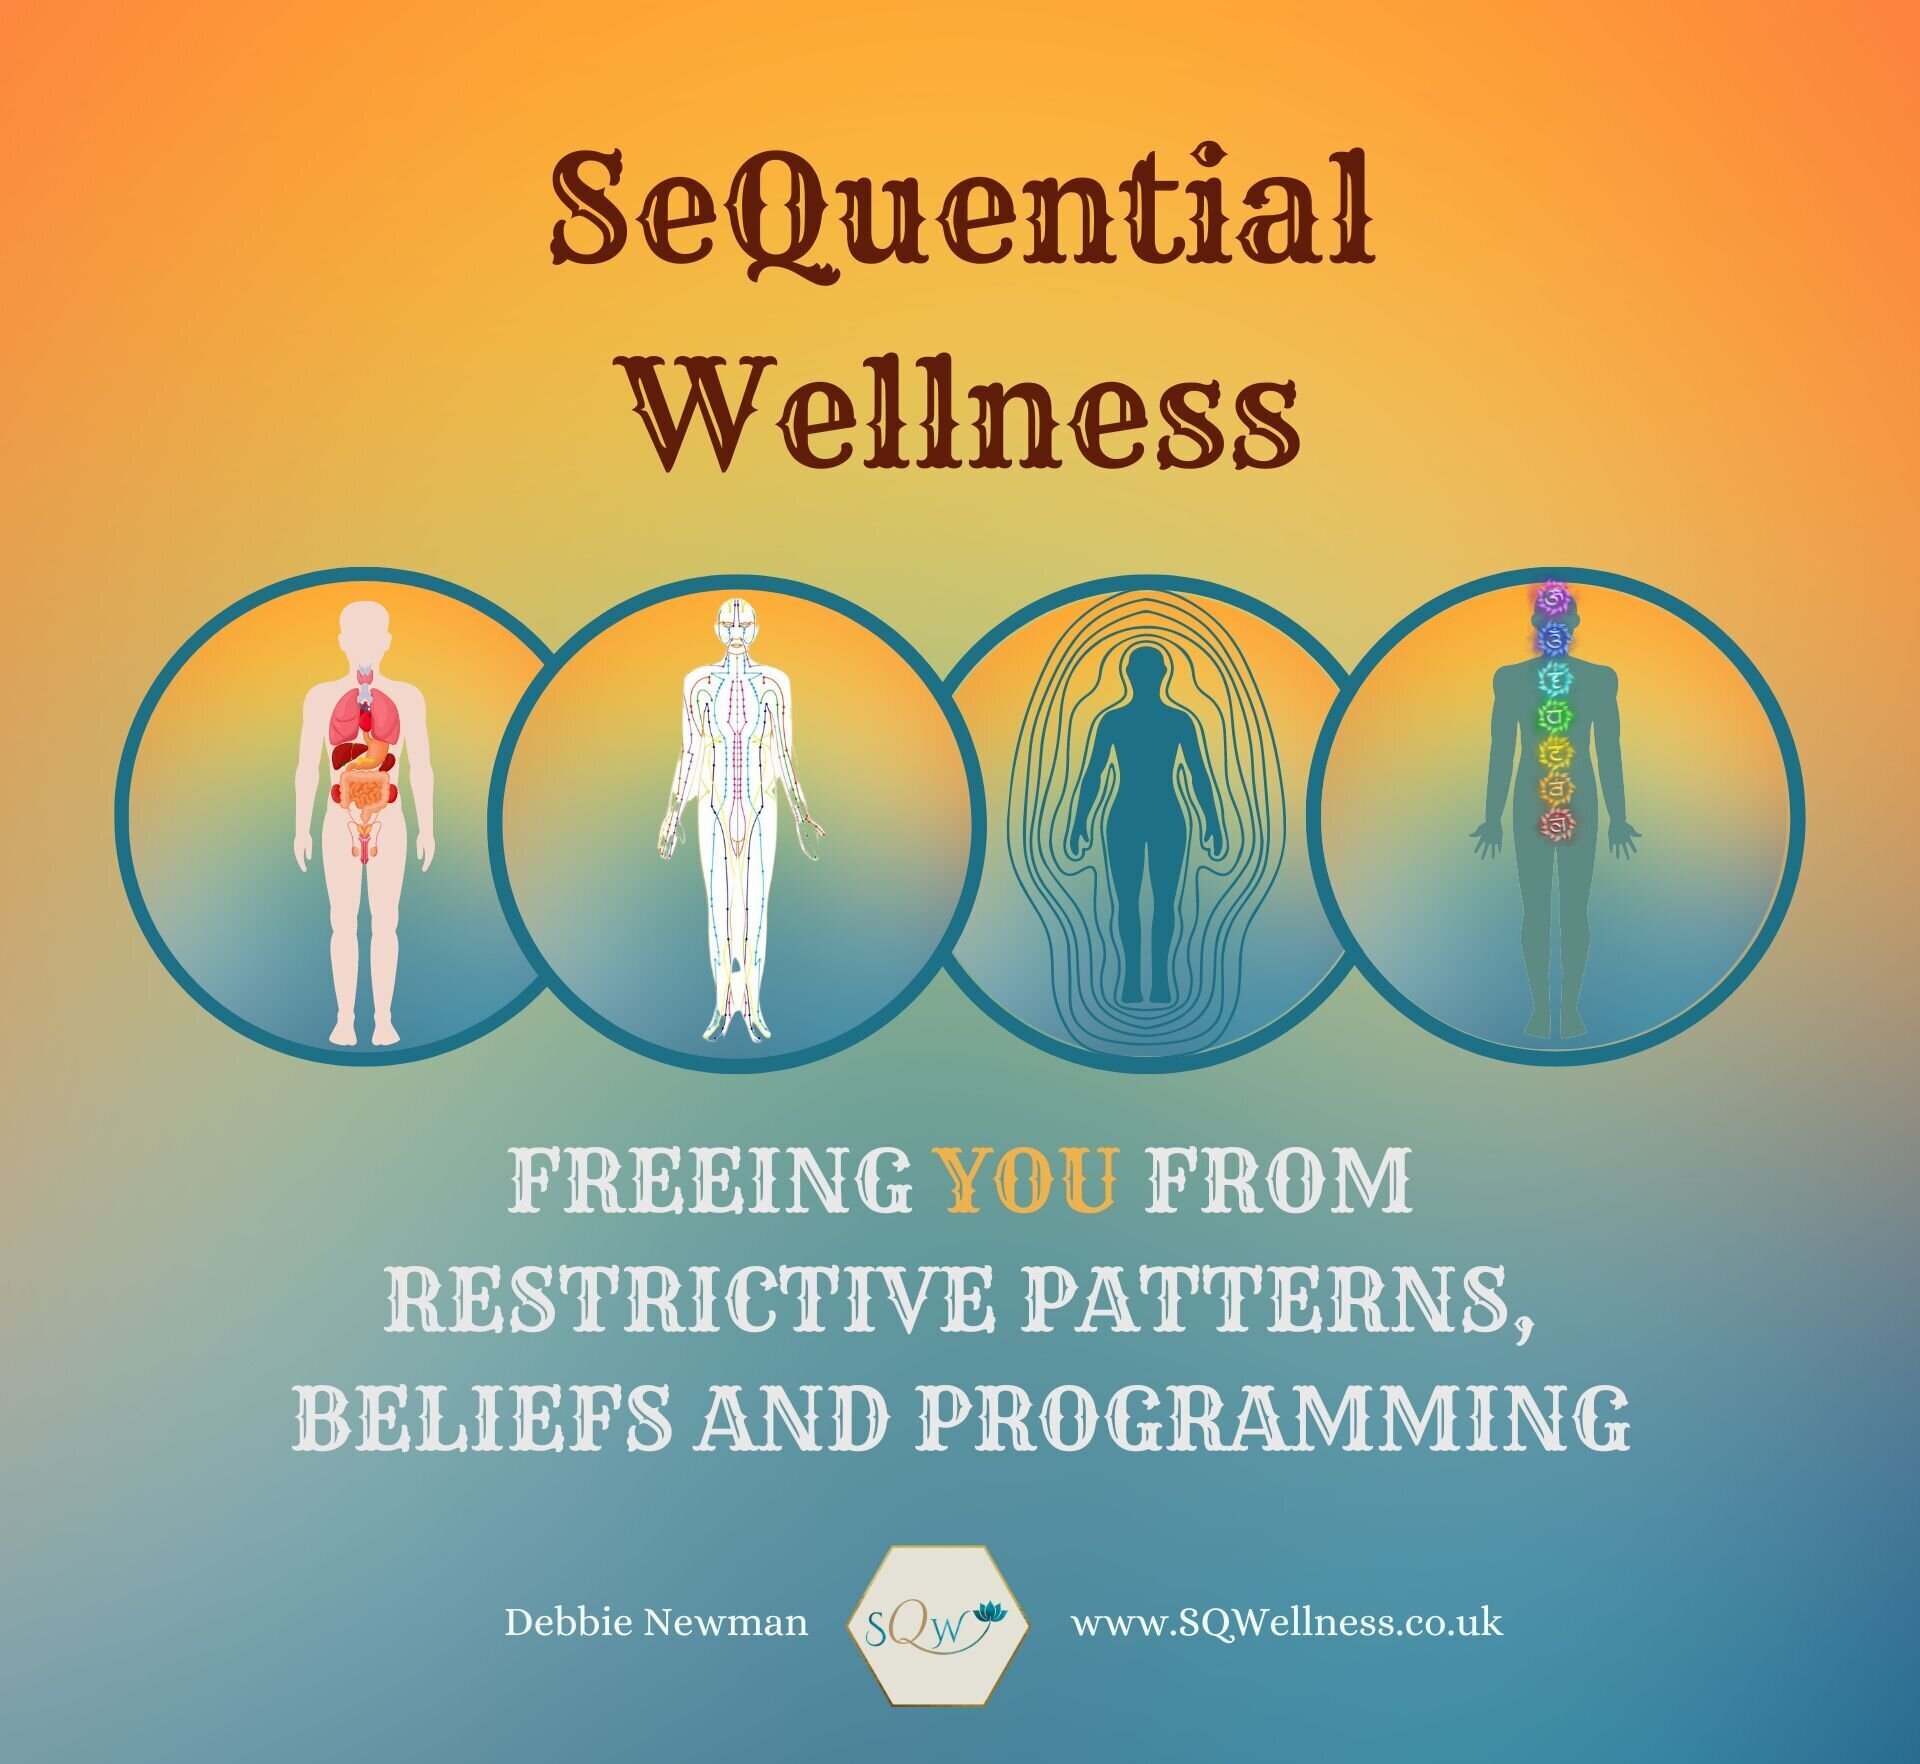 SeQuential Wellness Grantham 01476 230311